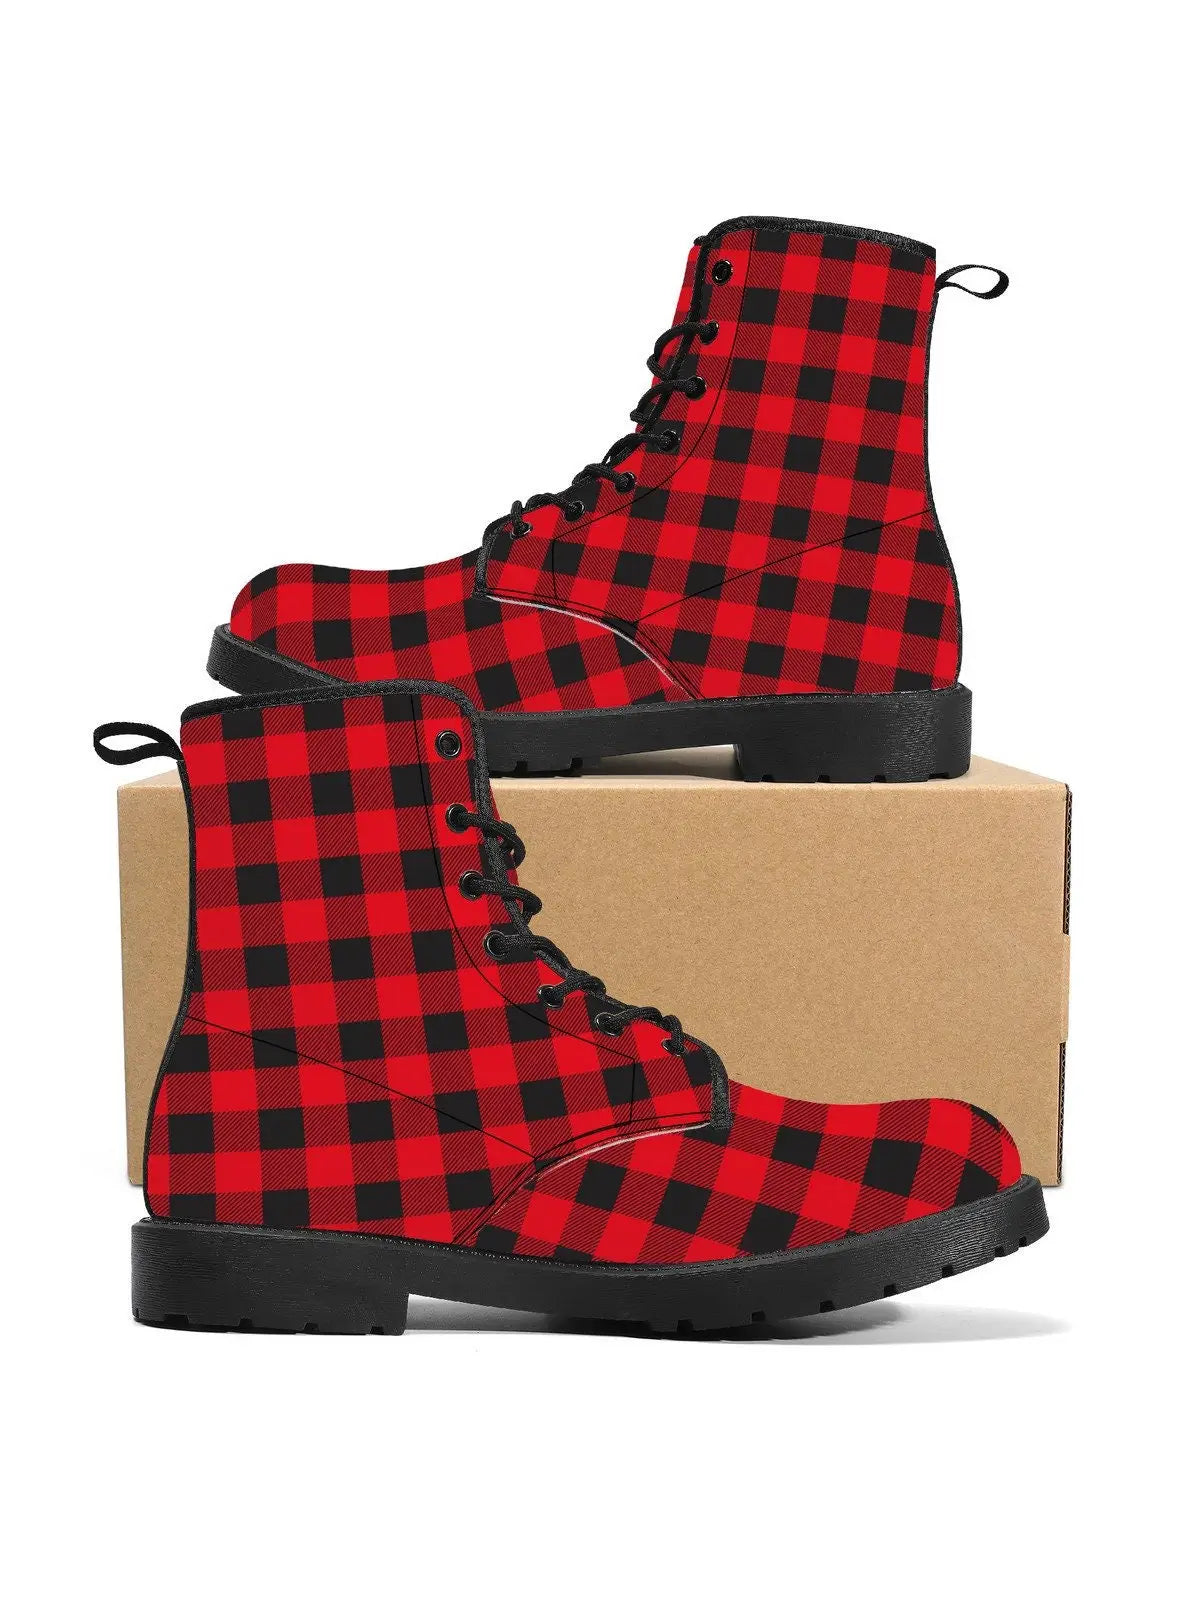 Plaid Print Handcrafted Combat Boots